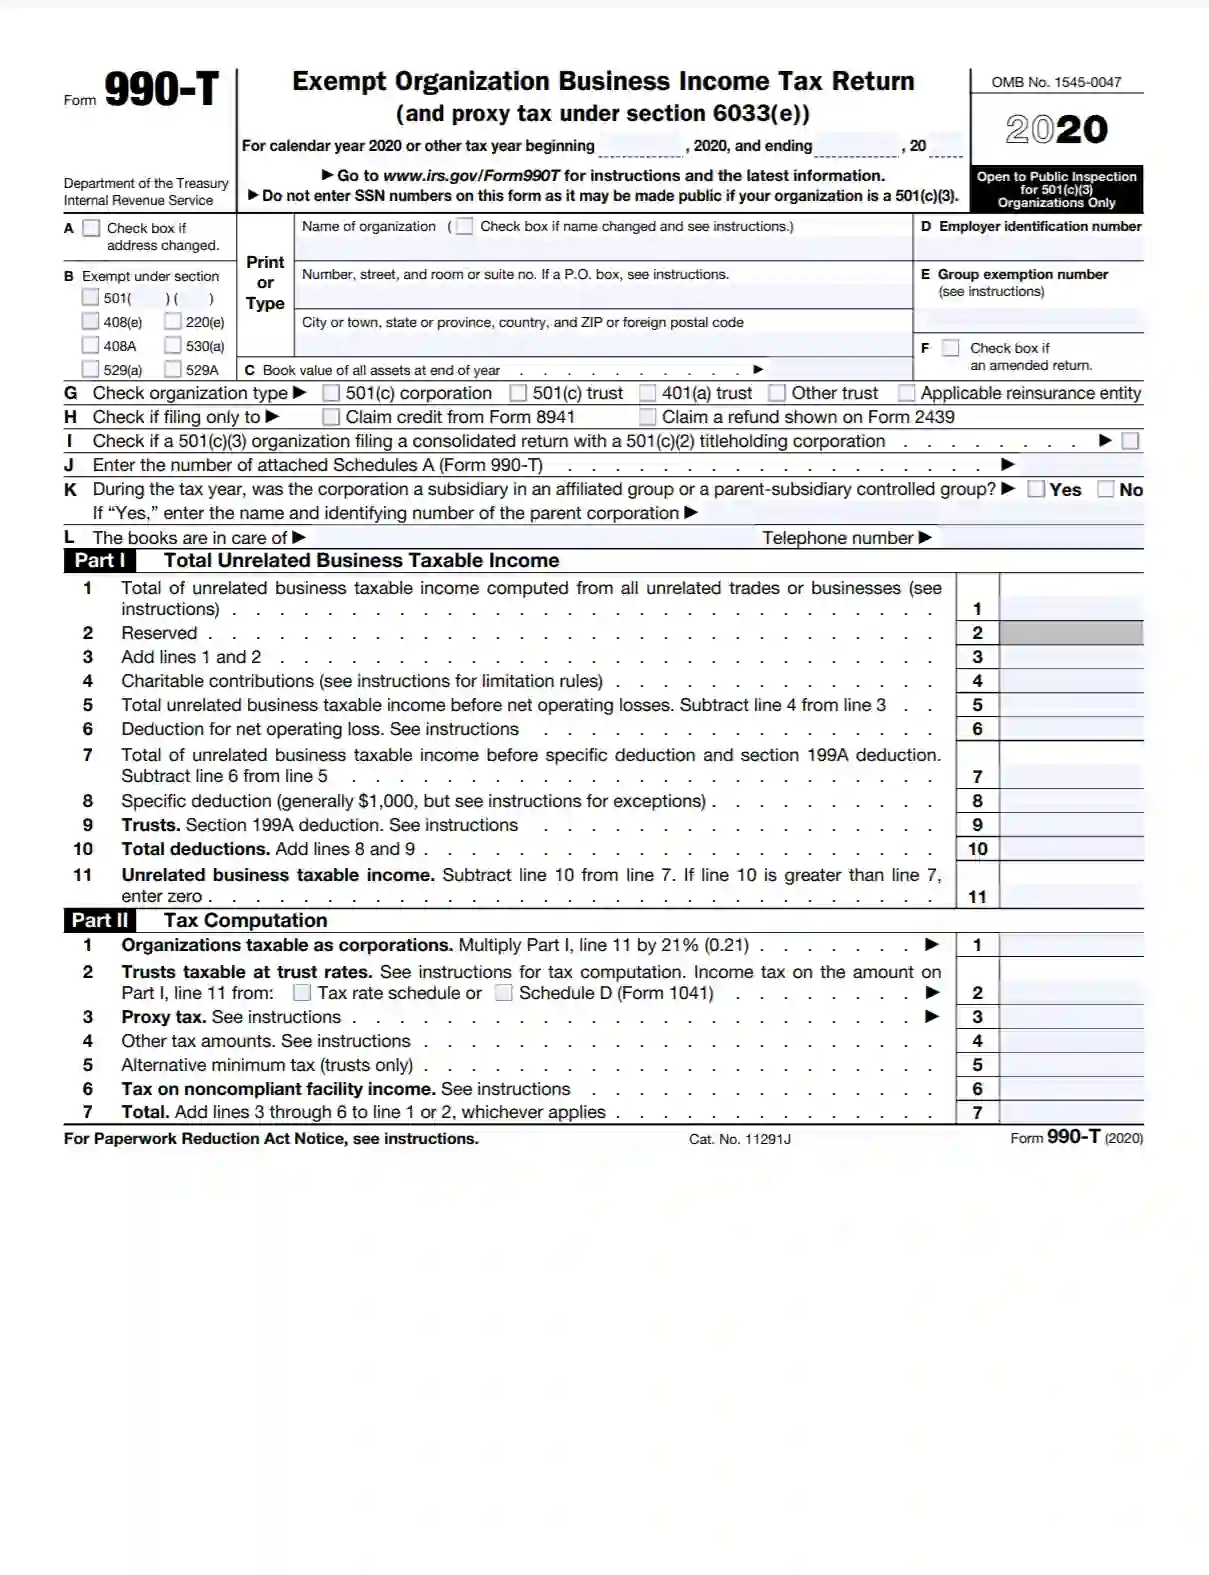 irs form 990 t 2020